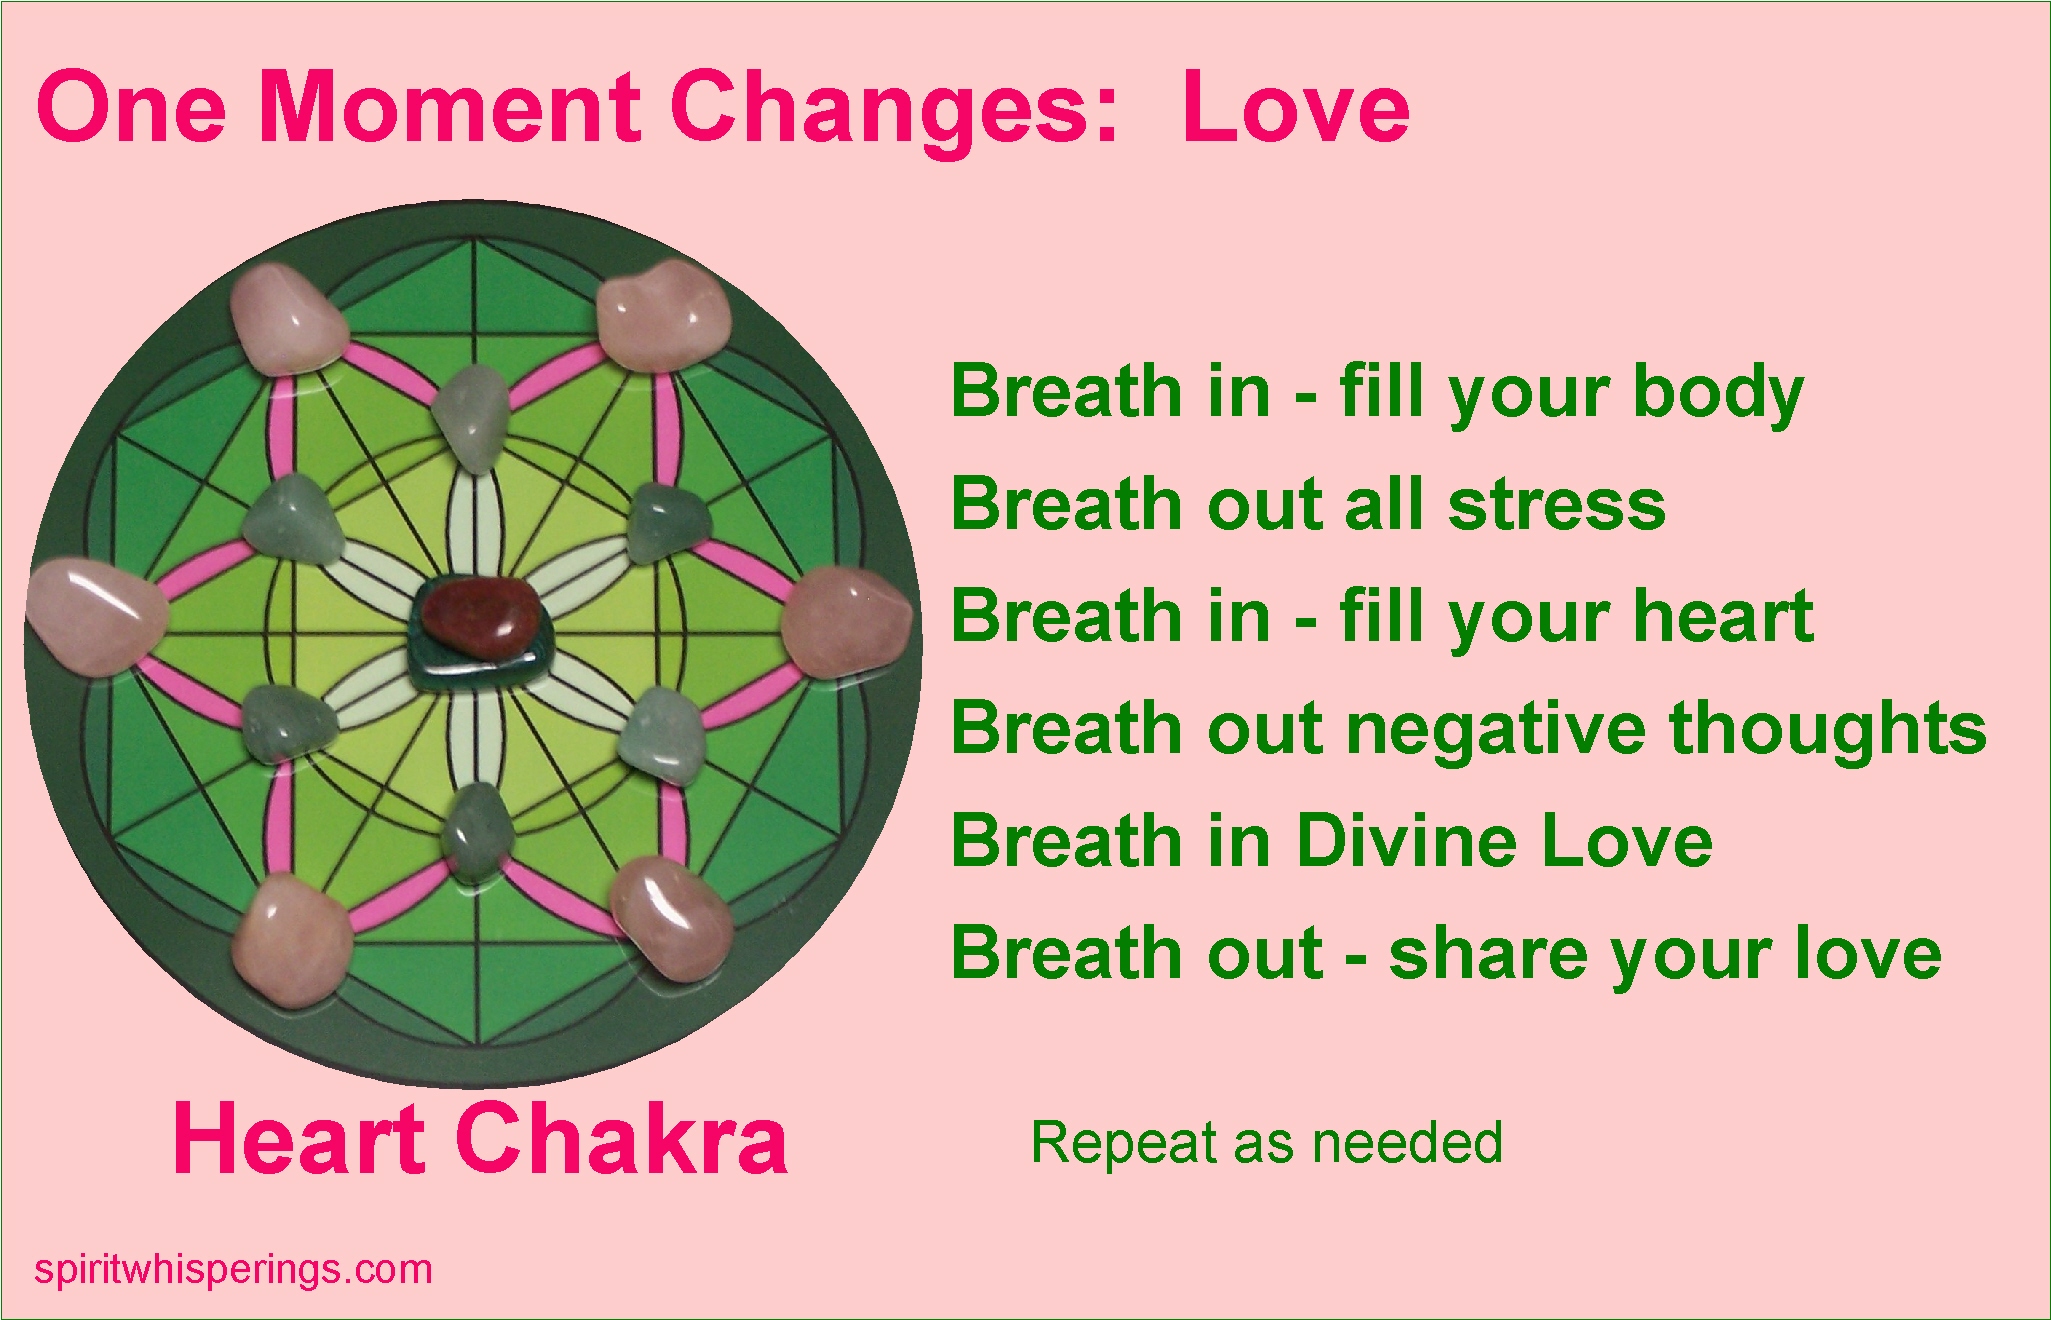 Love One Moment Change